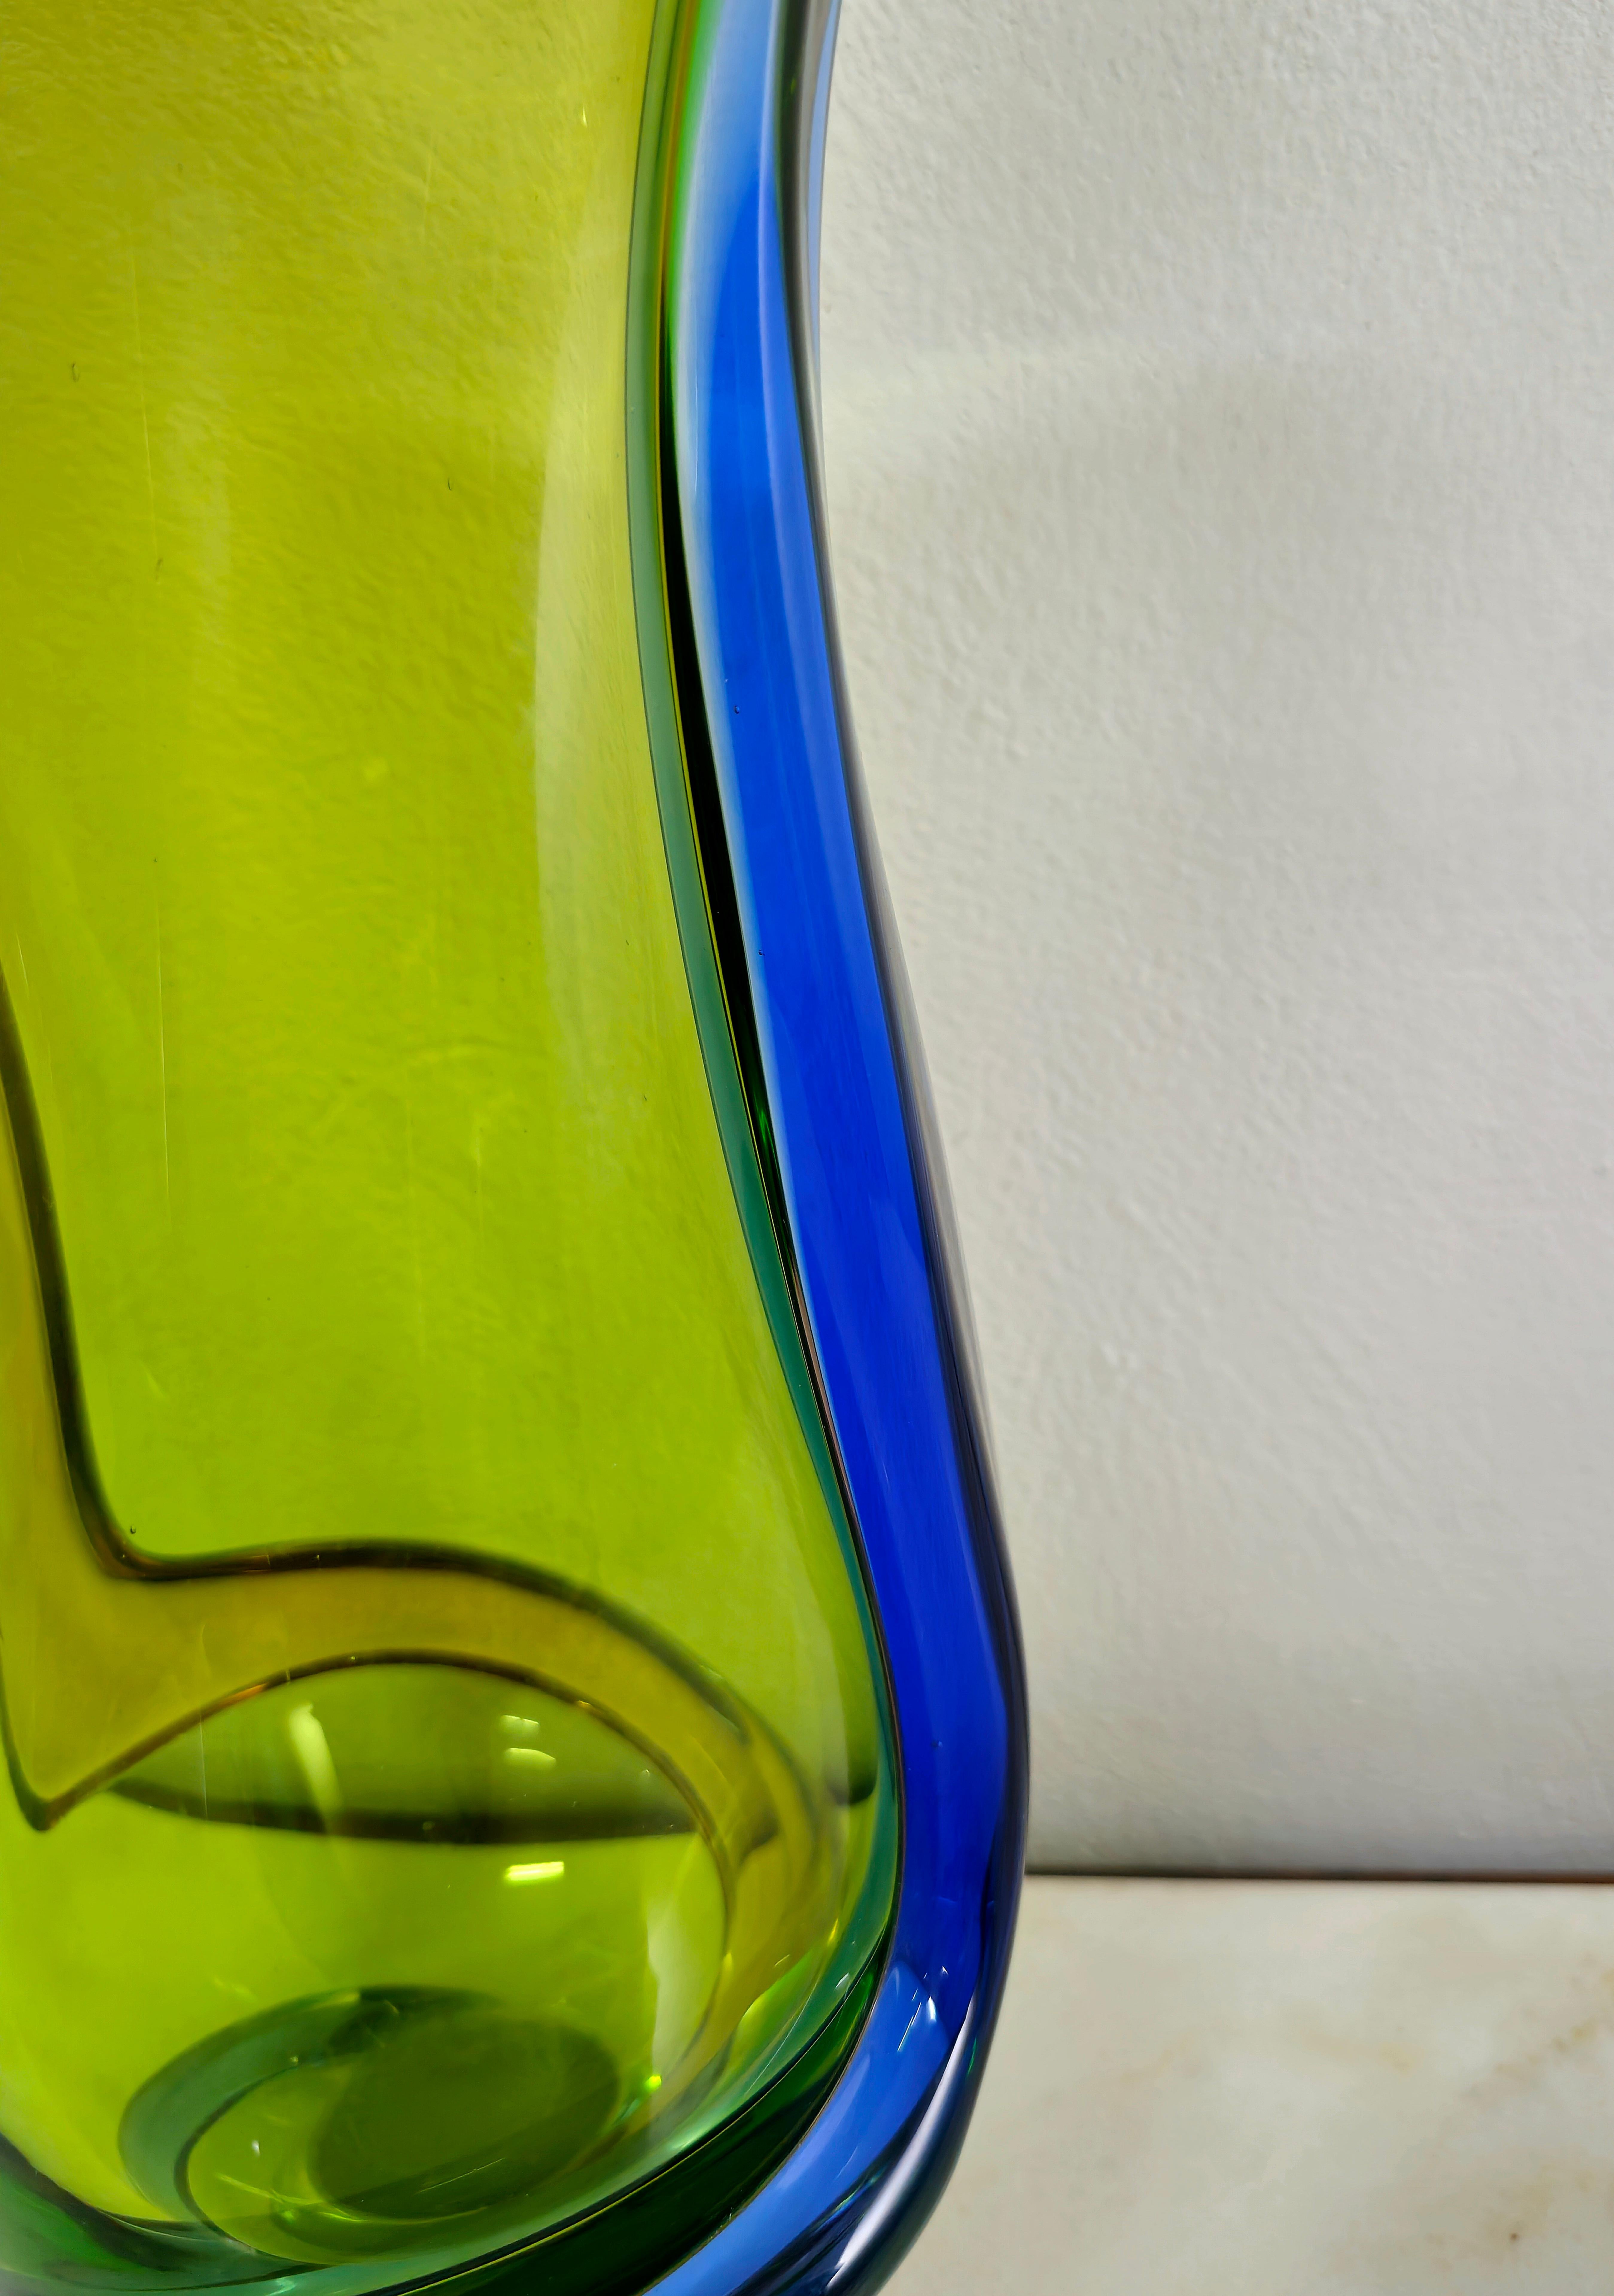 Vase Decorative Object Murano Glass Attributed to Flavio Poli Midcentury 1970s For Sale 1